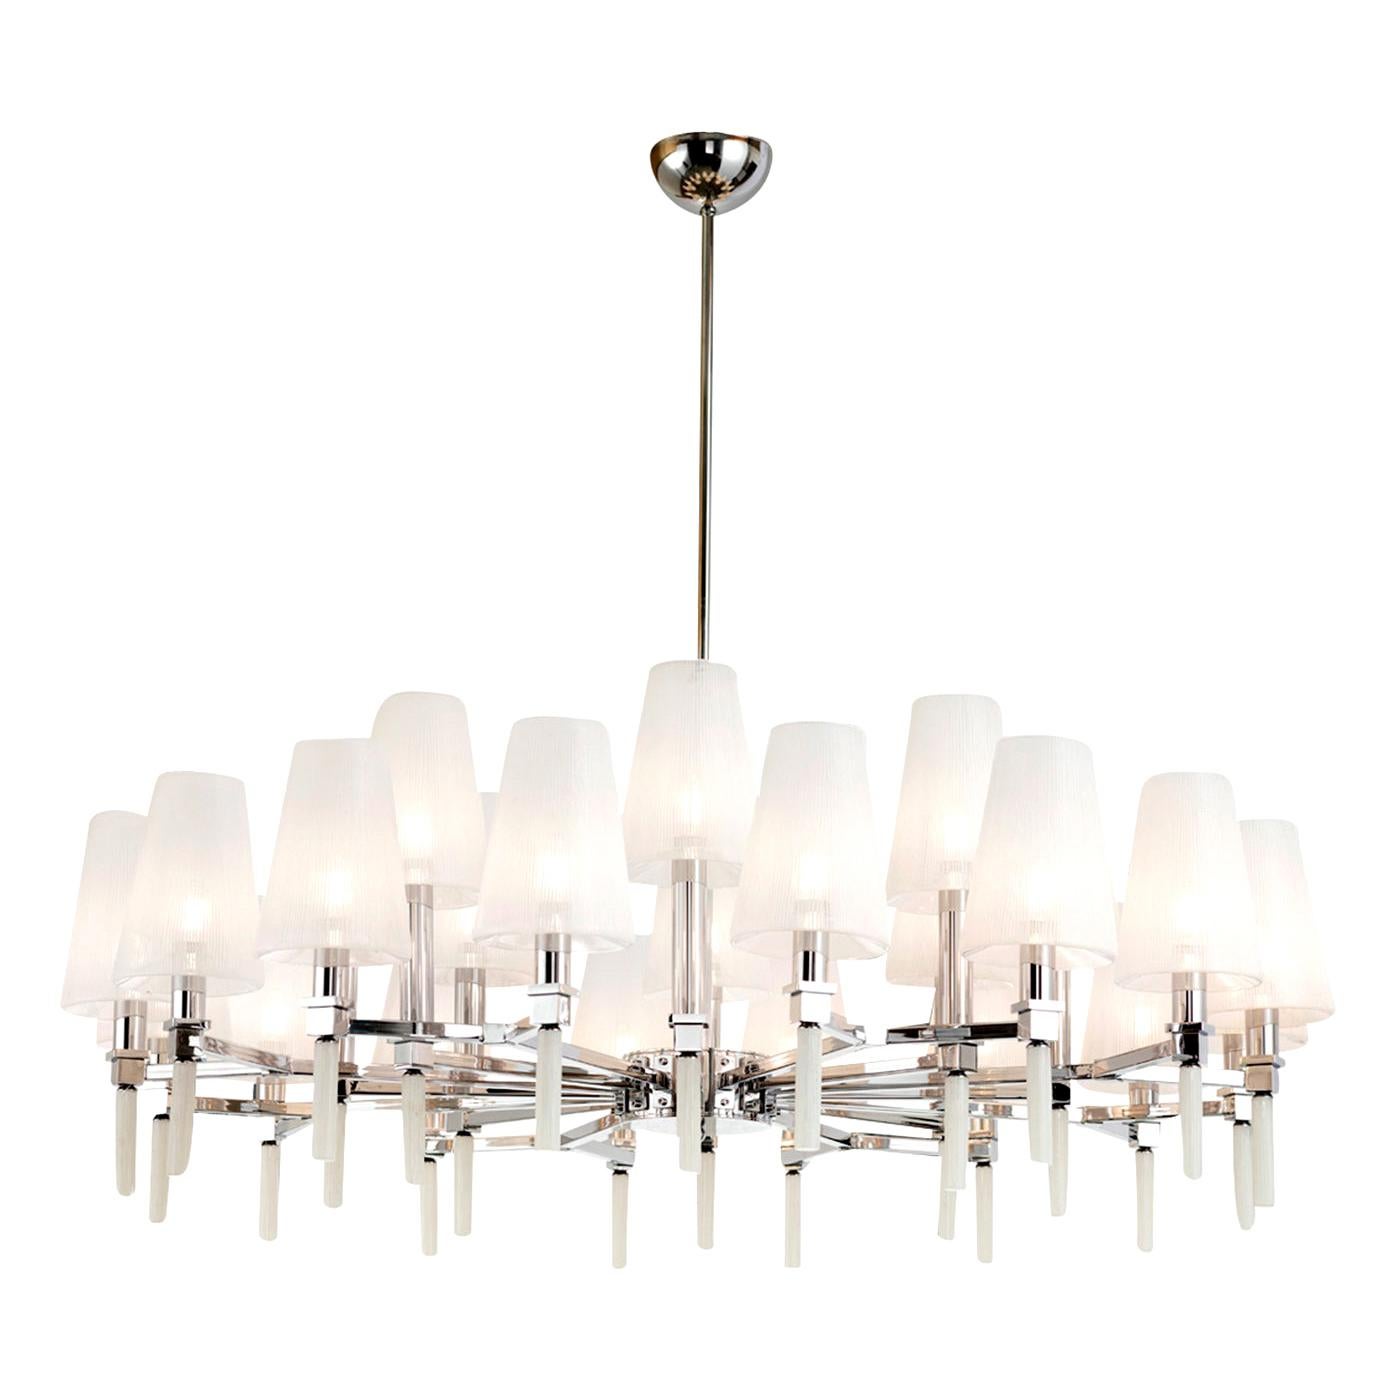 Chrome and White 24 lights Chandelier